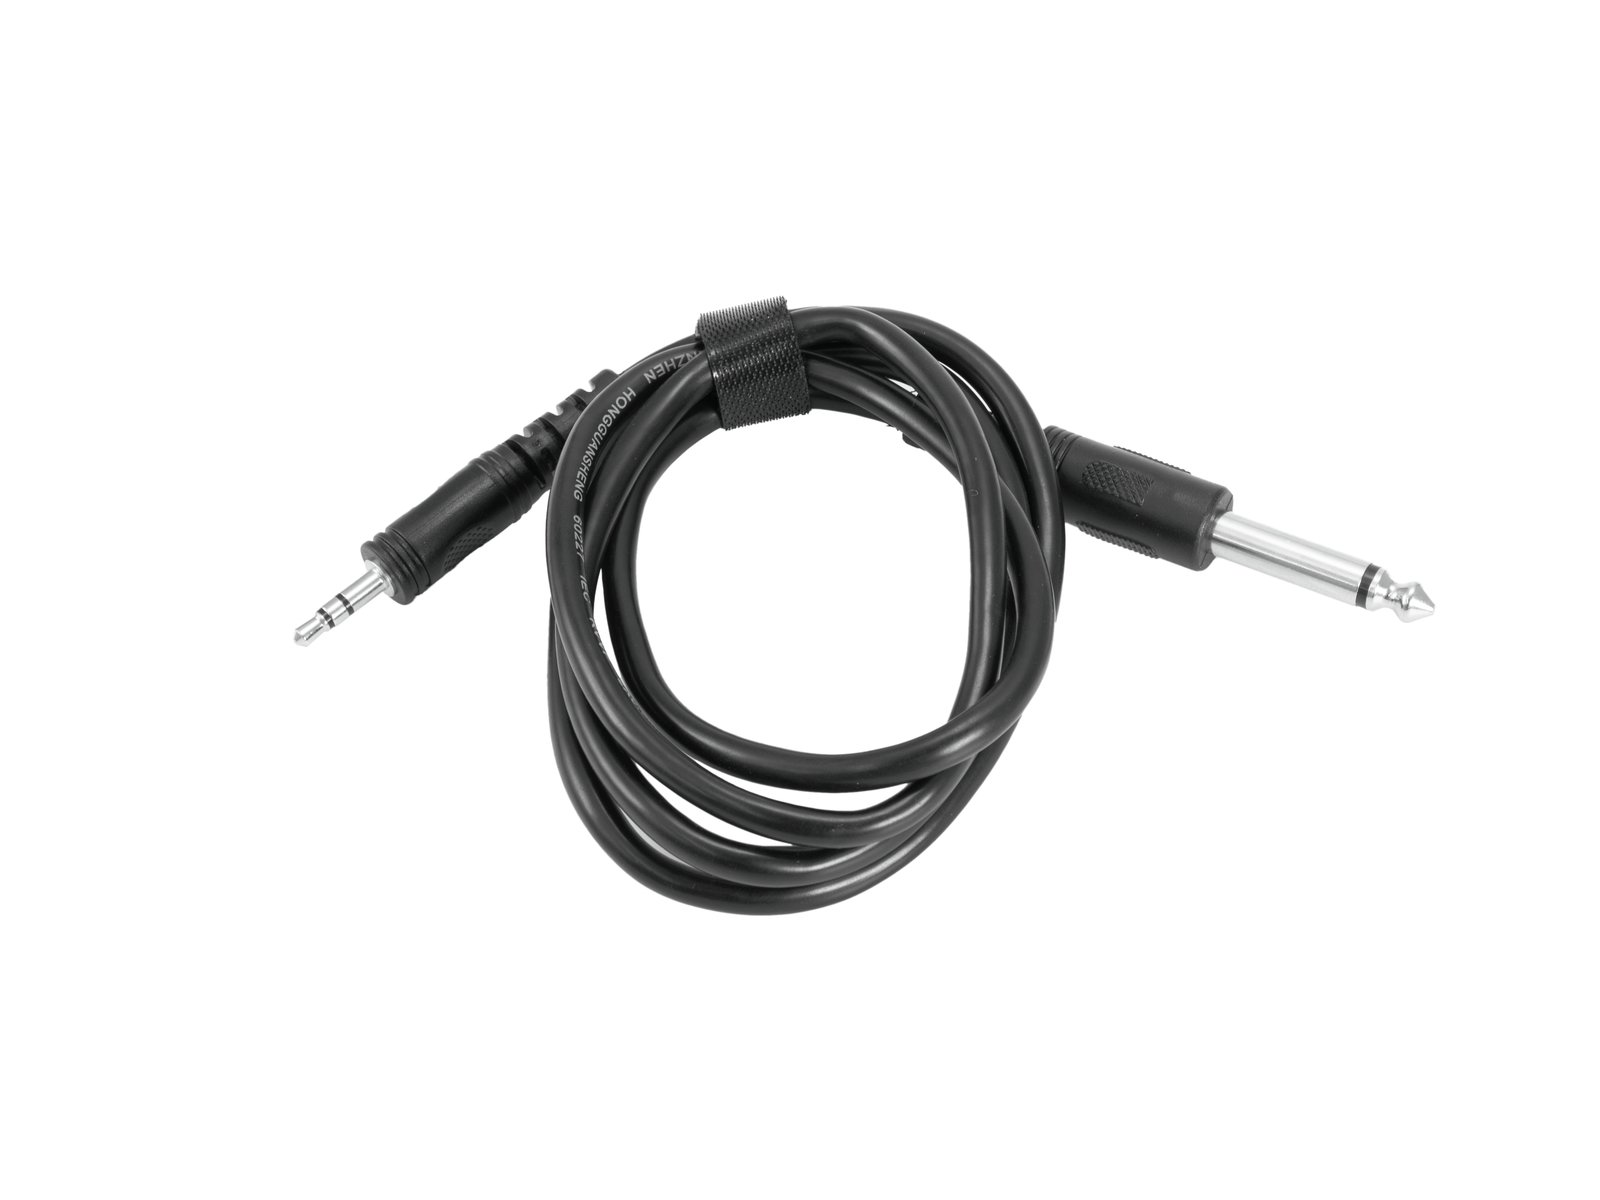 OMNITRONIC FAS Electronic Guitar Adaptor Cable for Bodypack